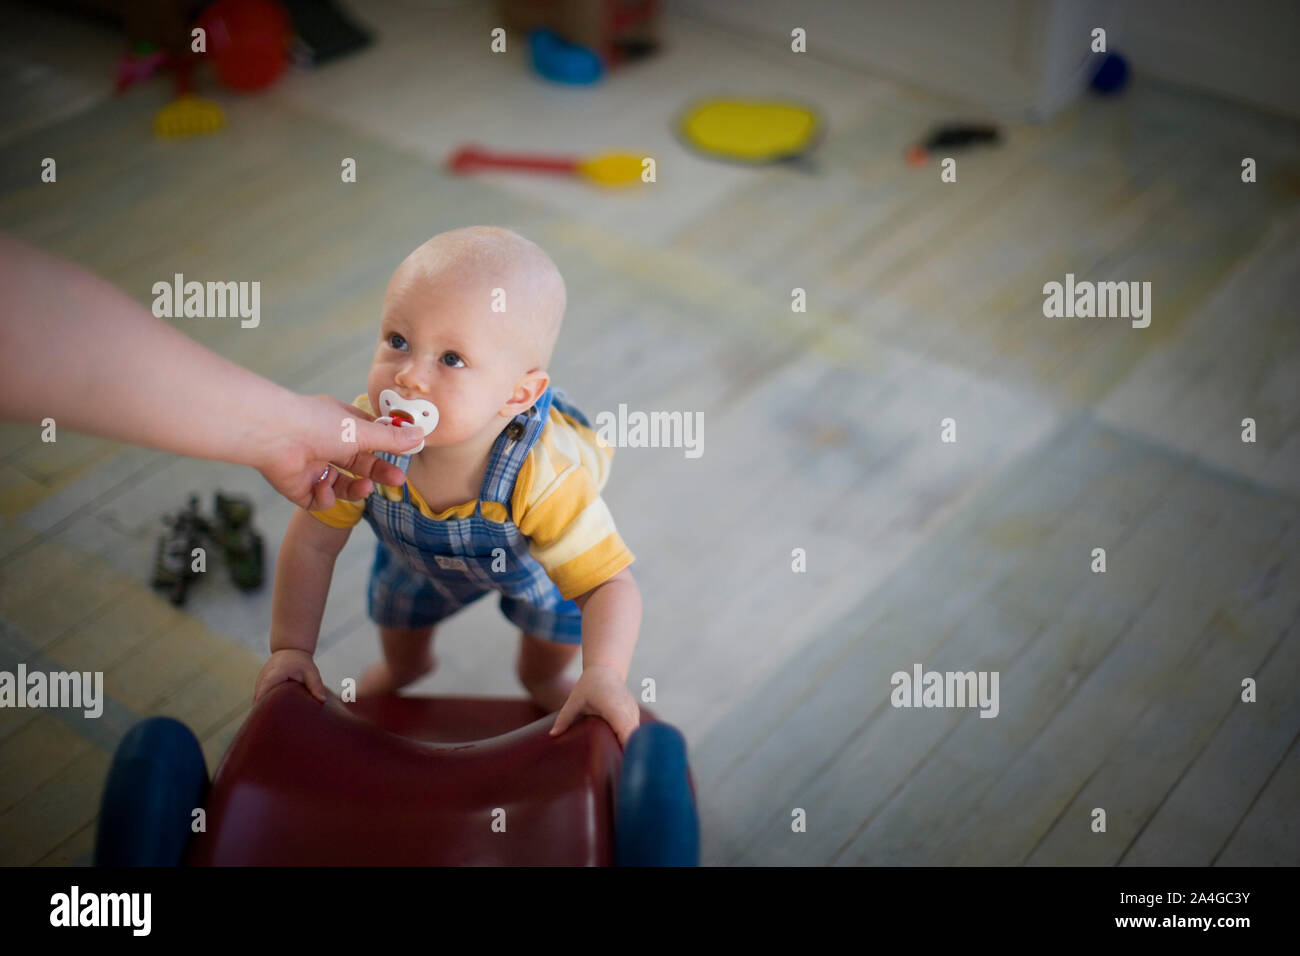 Toddler with a pacifier walking with a toy in a room. Stock Photo